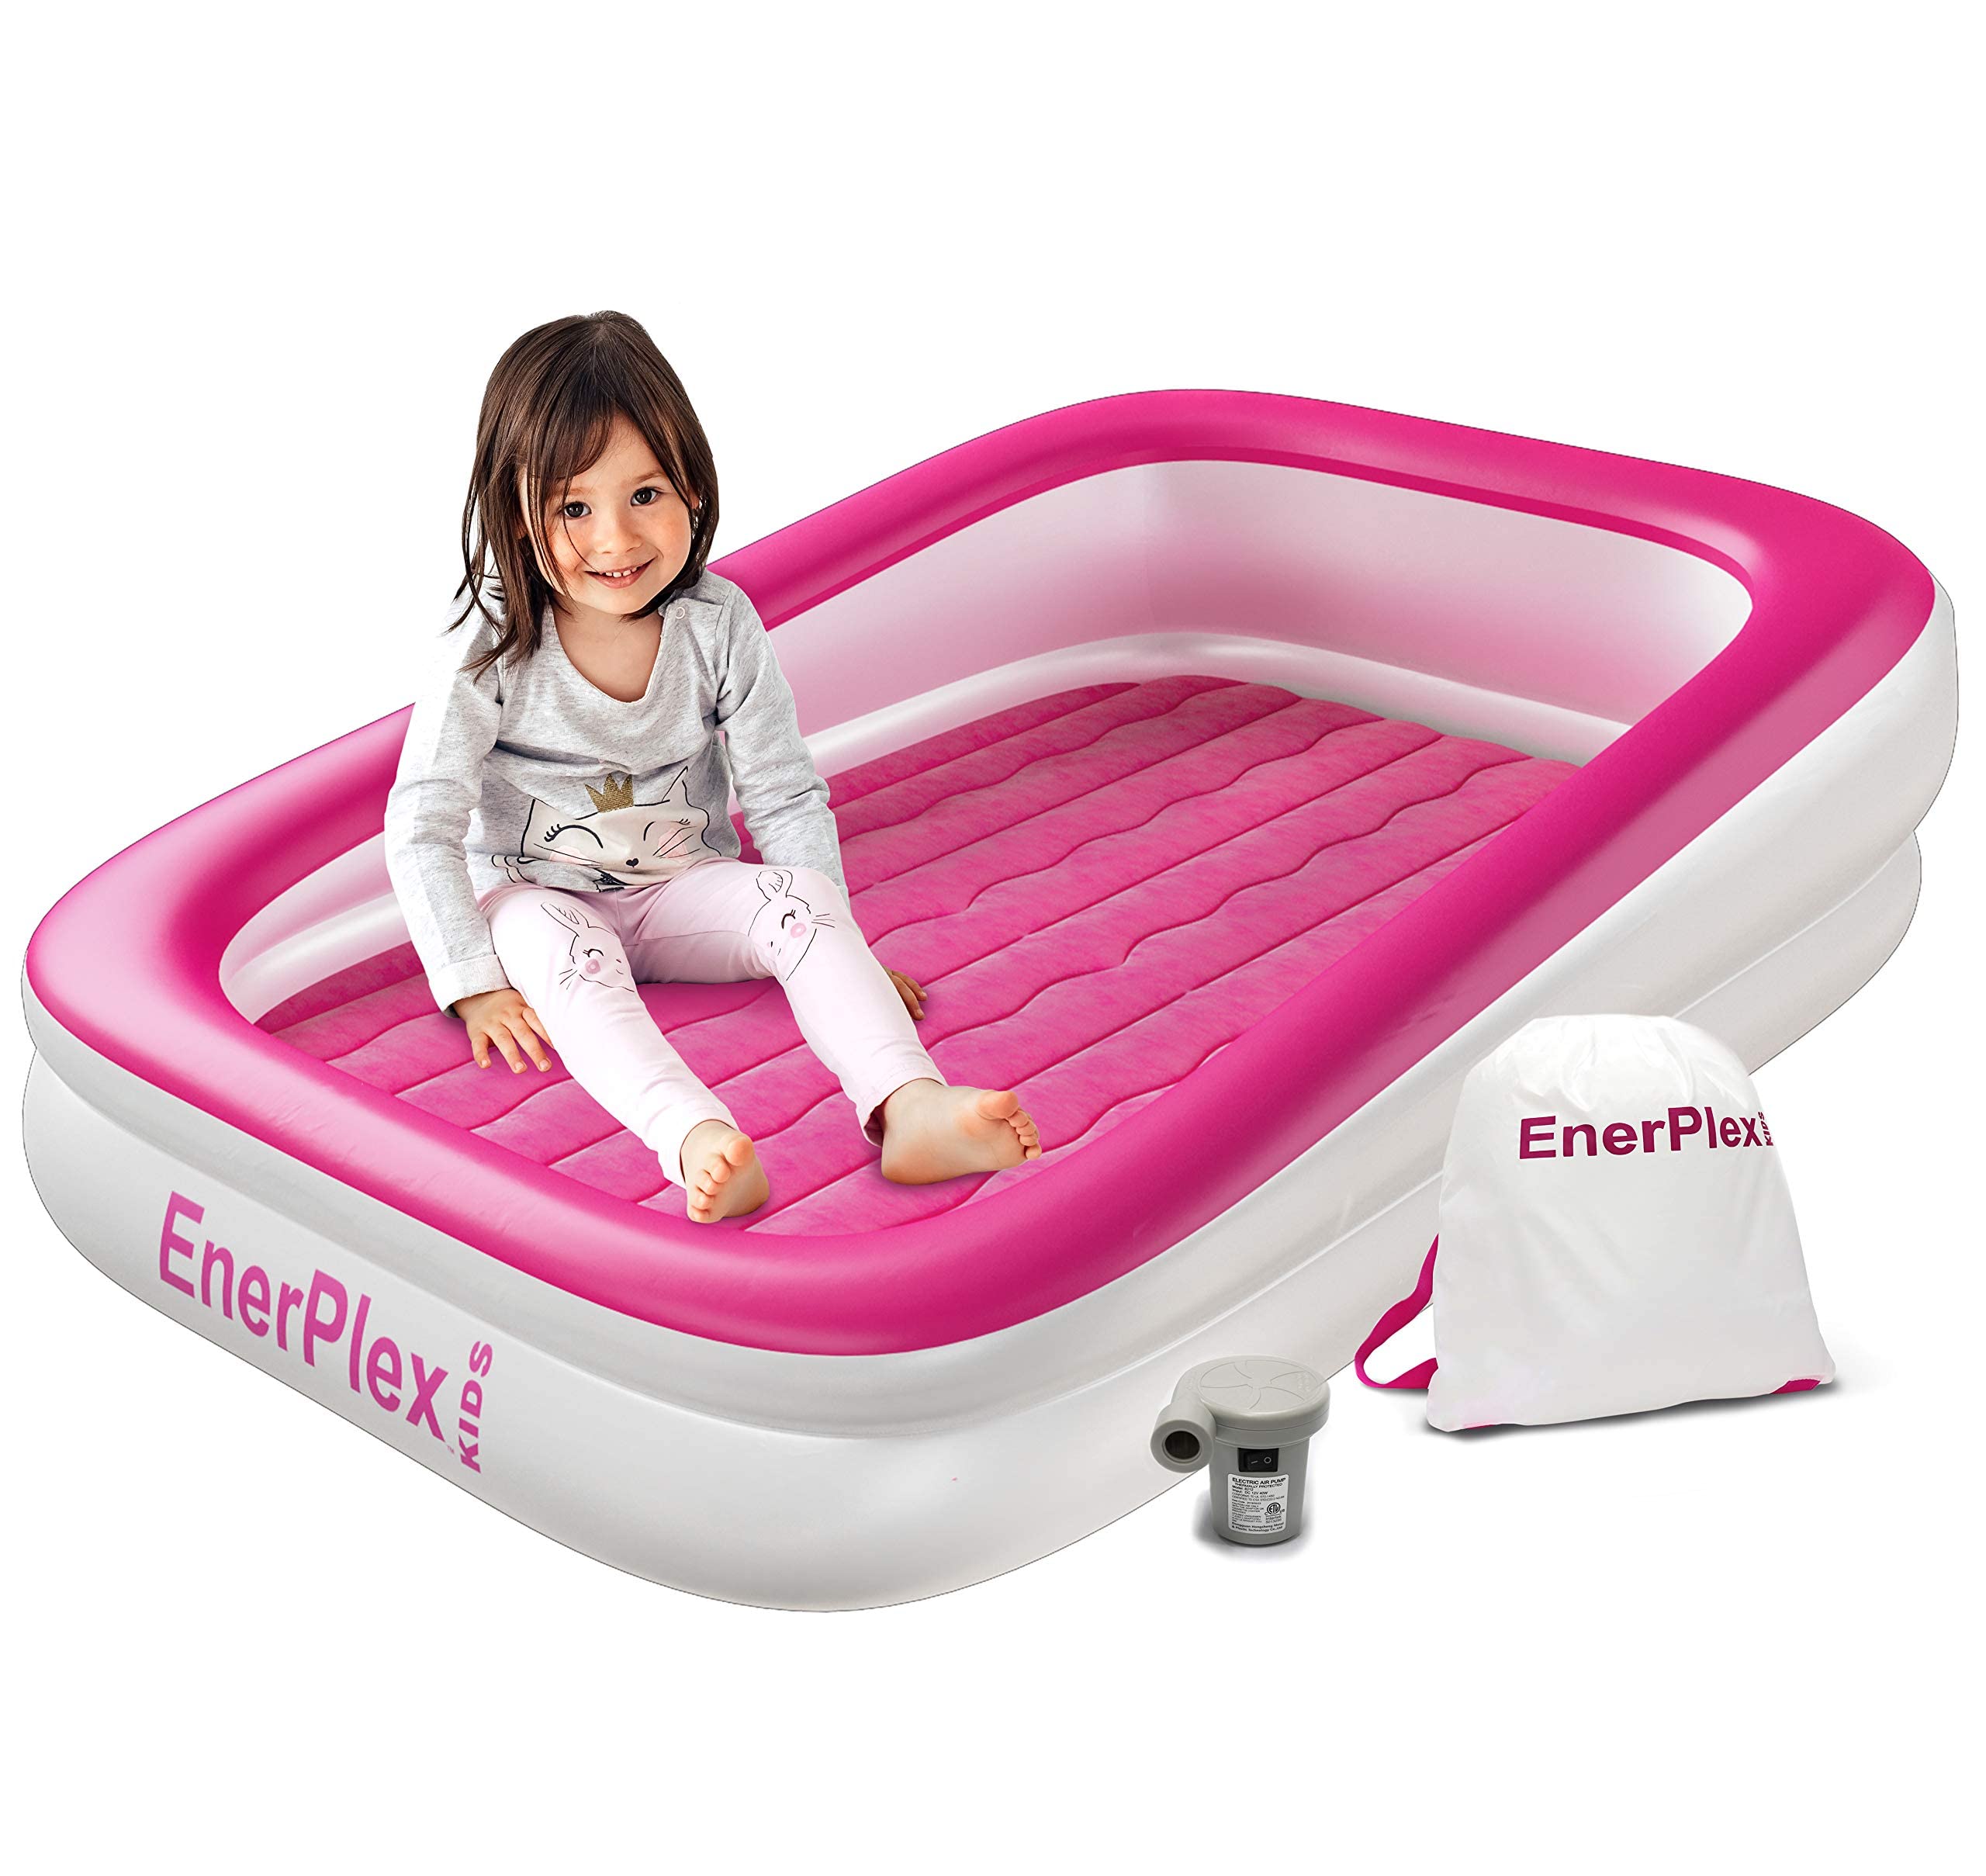 EnerPlex Kids Inflatable Travel Bed with High Speed Pump, Portable Air Mattress for Kids on The go, Blow up Toddler Travel Bed w